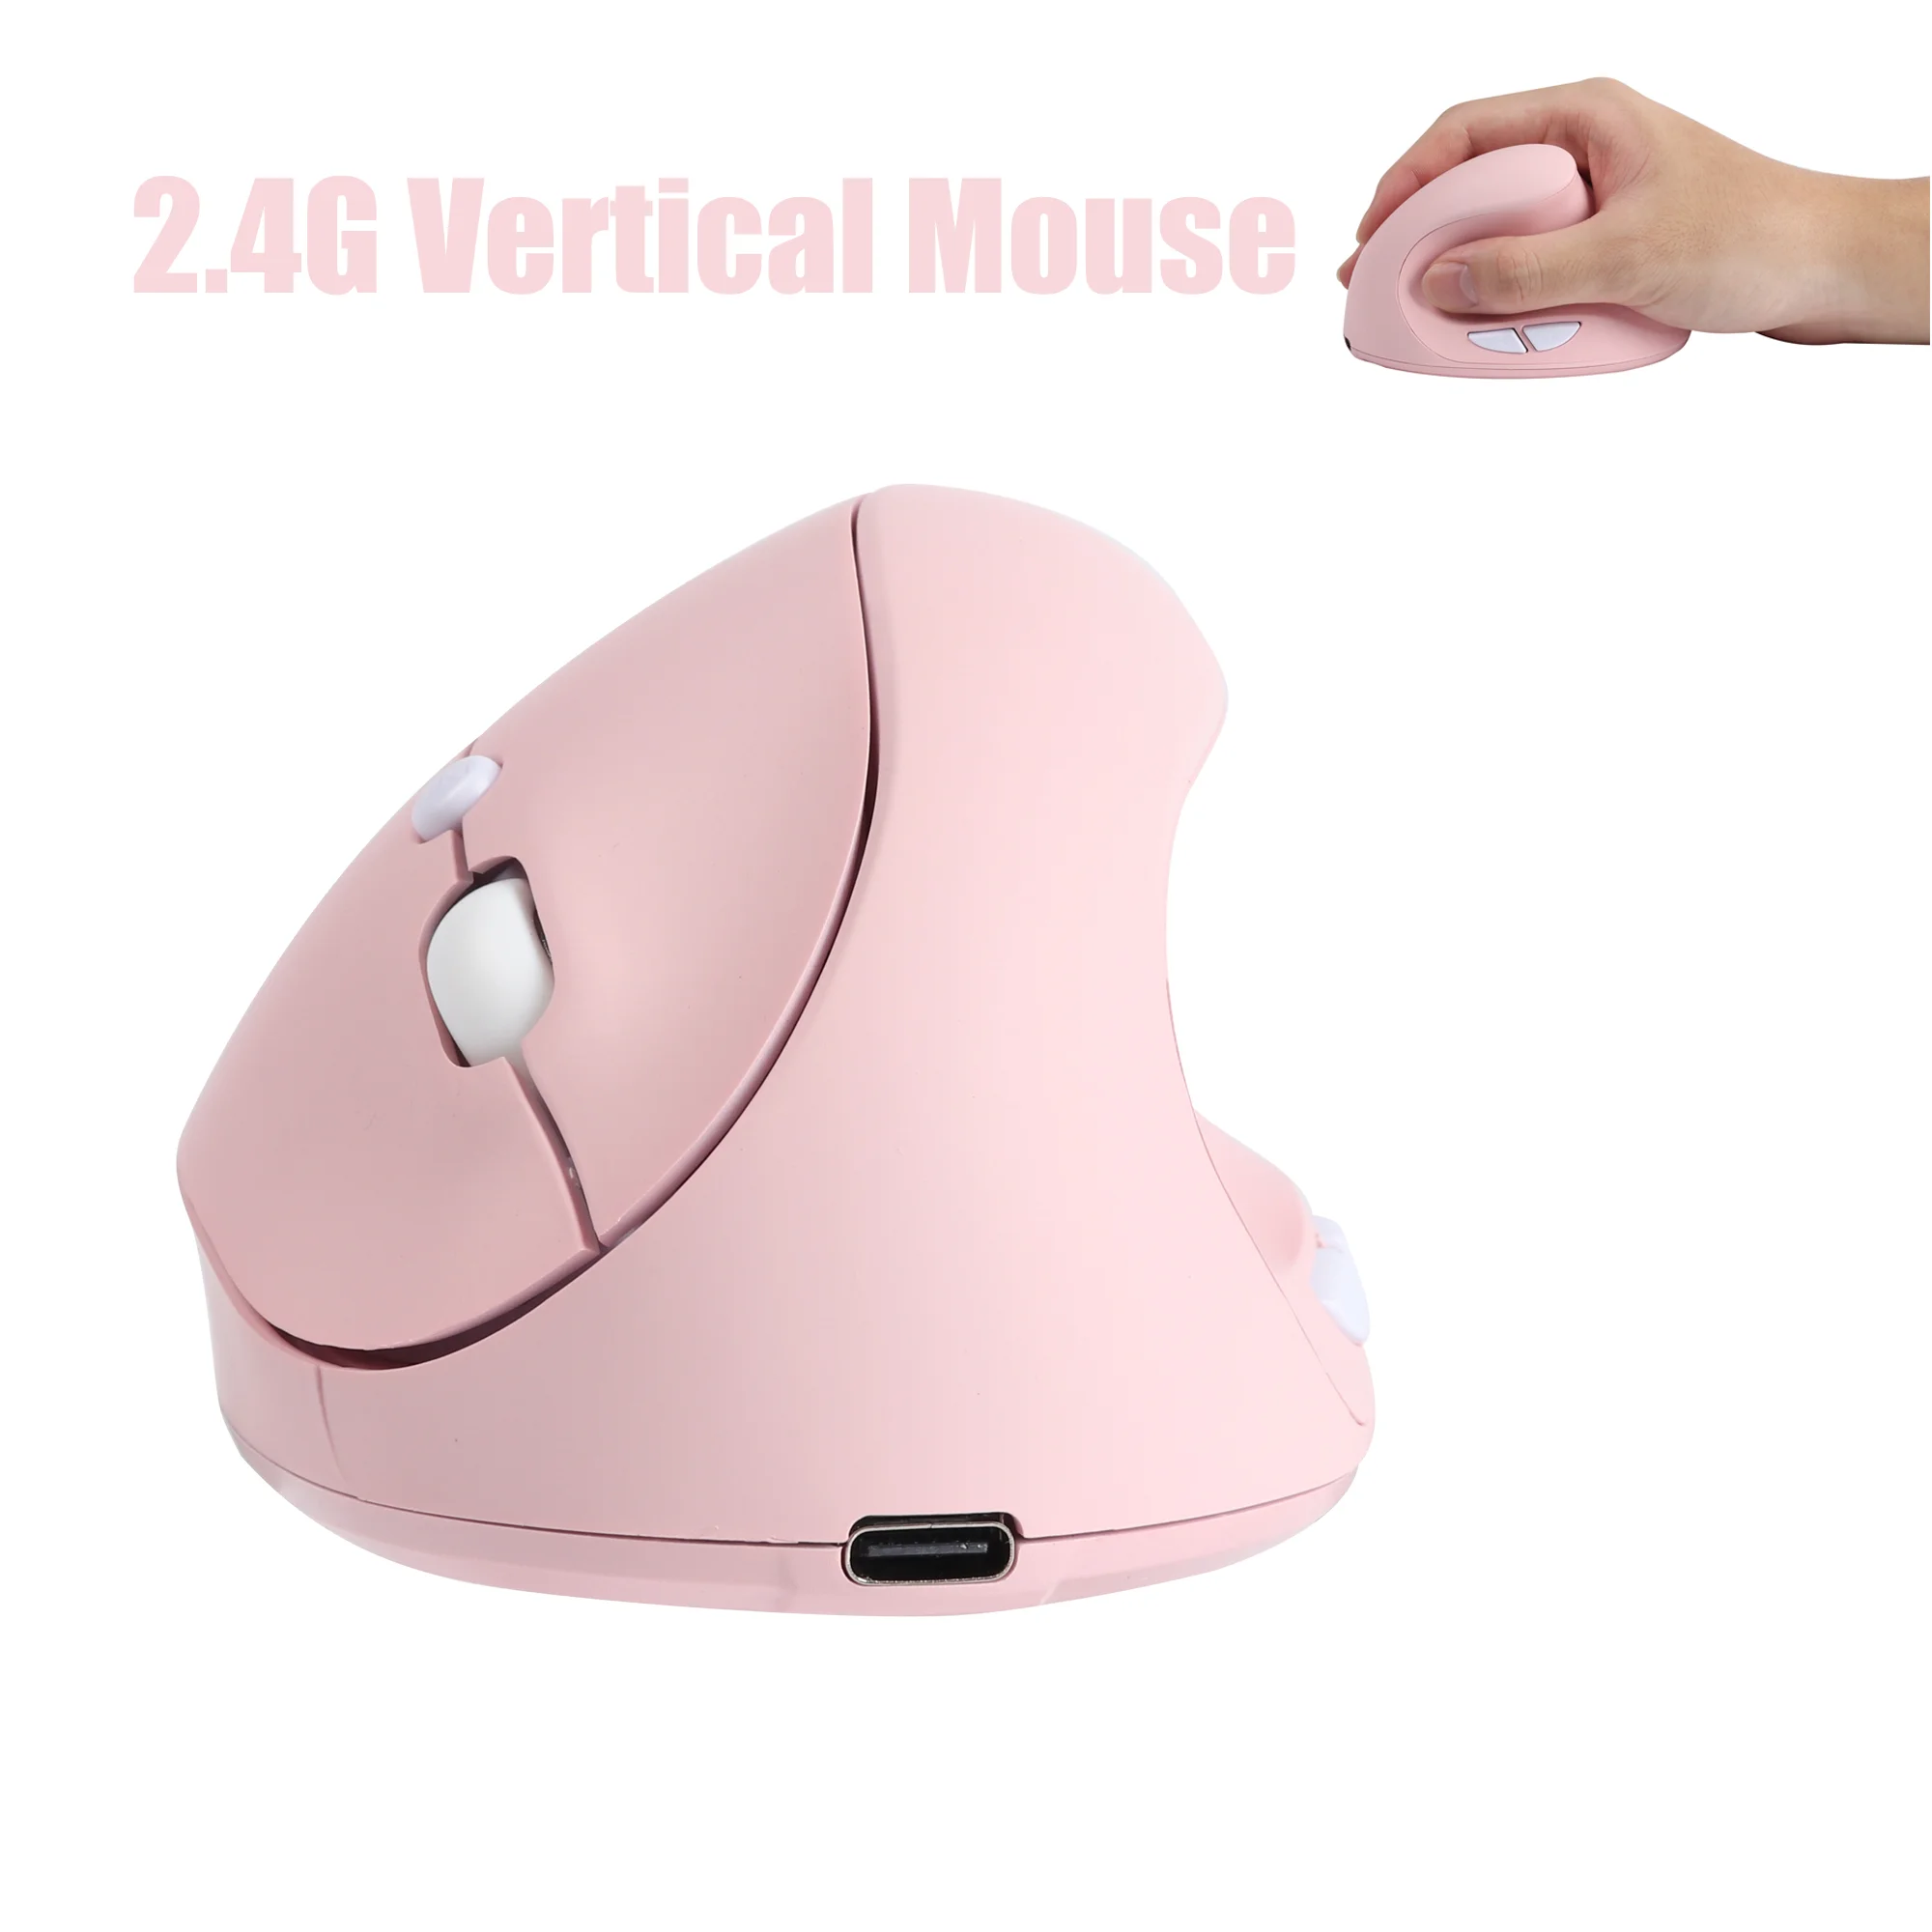 

Ergonomic Vertical Mouse Wireless Mouse 1600DPI USB Optical Mause Rechargeable Office PC Gamer Mice Wrist Healthy For Laptop PC